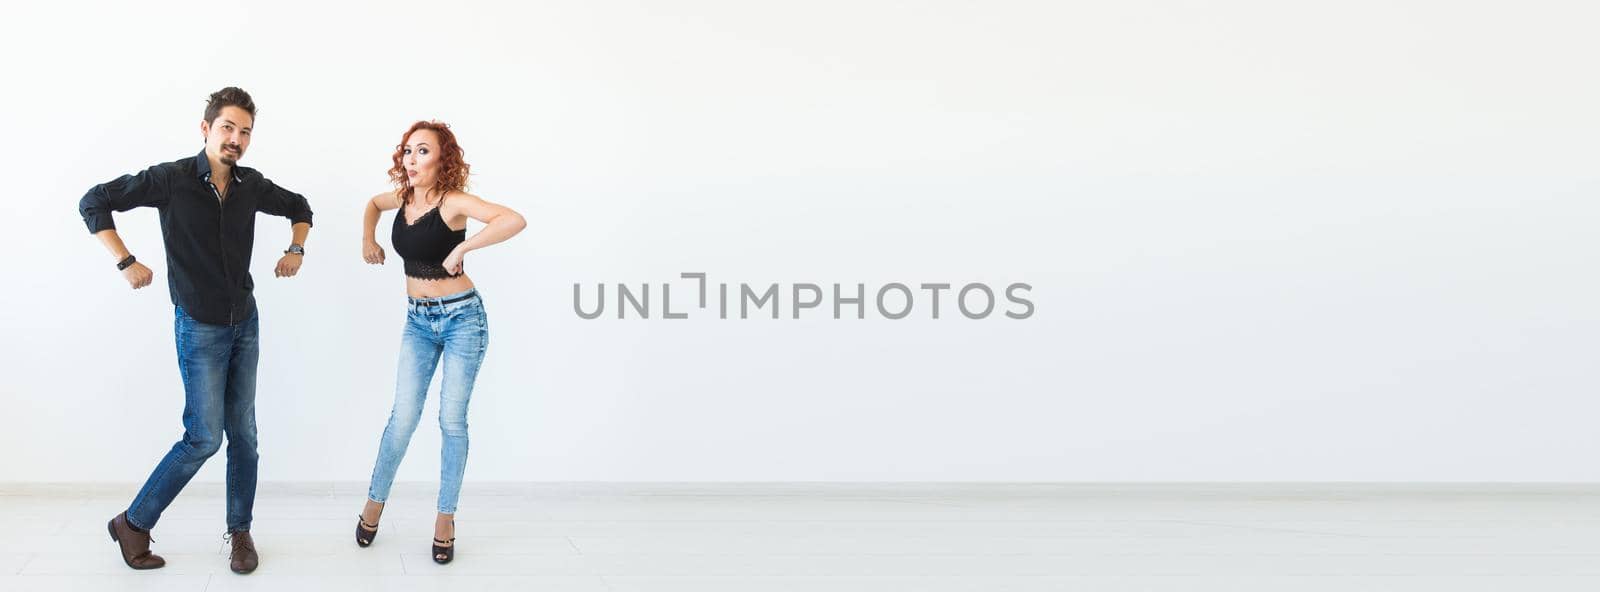 Banner social dance concept - Crazy dancing, cheerful couple over white background copy space and place for advertising by Satura86